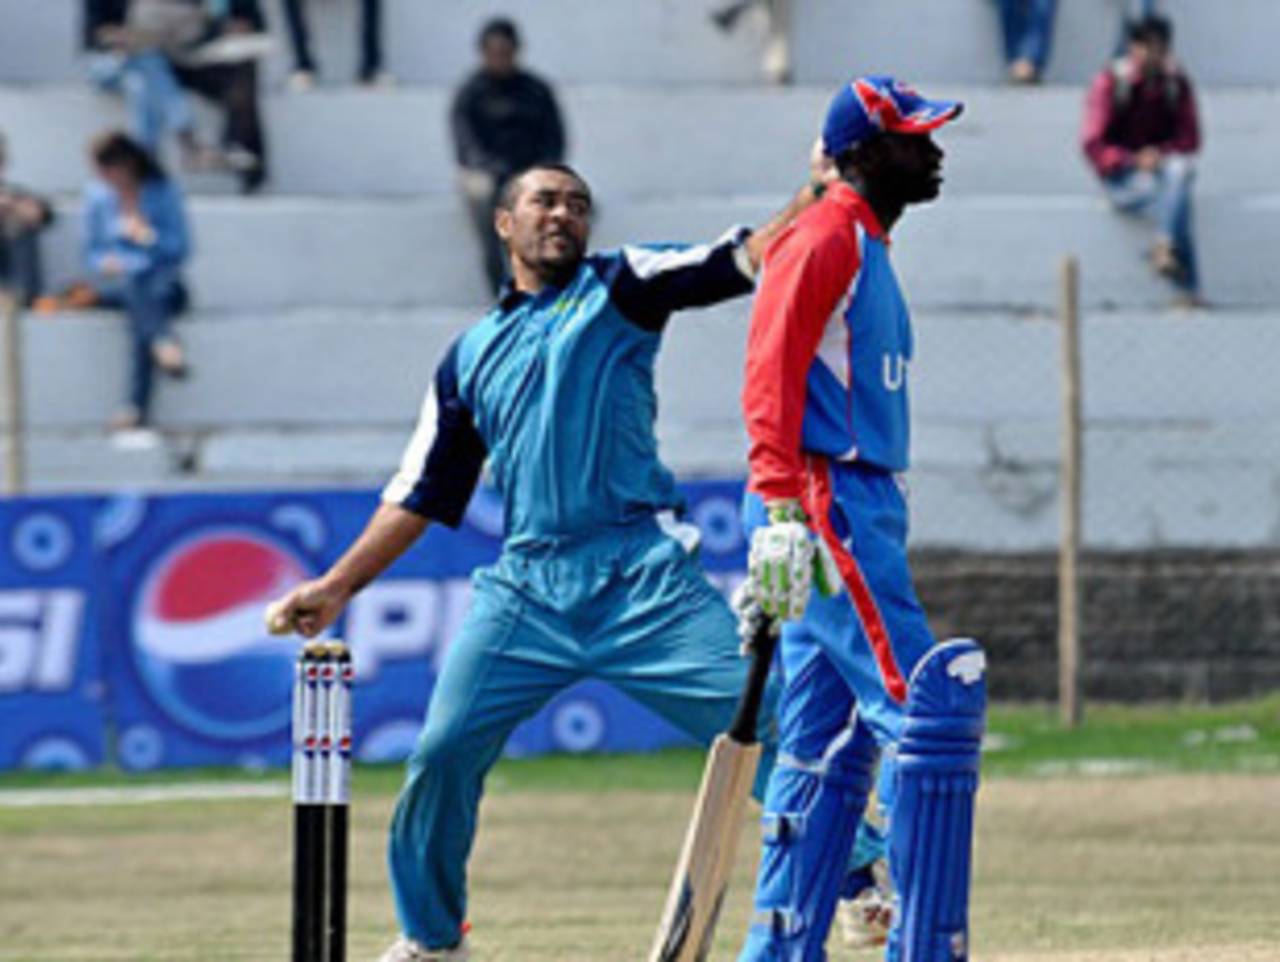 Lennox Cush is at the non-striker's end as Josefa Dabea bowls, Fiji v United States of America, ICC World Cricket League Division Five, Lalitpur, February 20, 2010